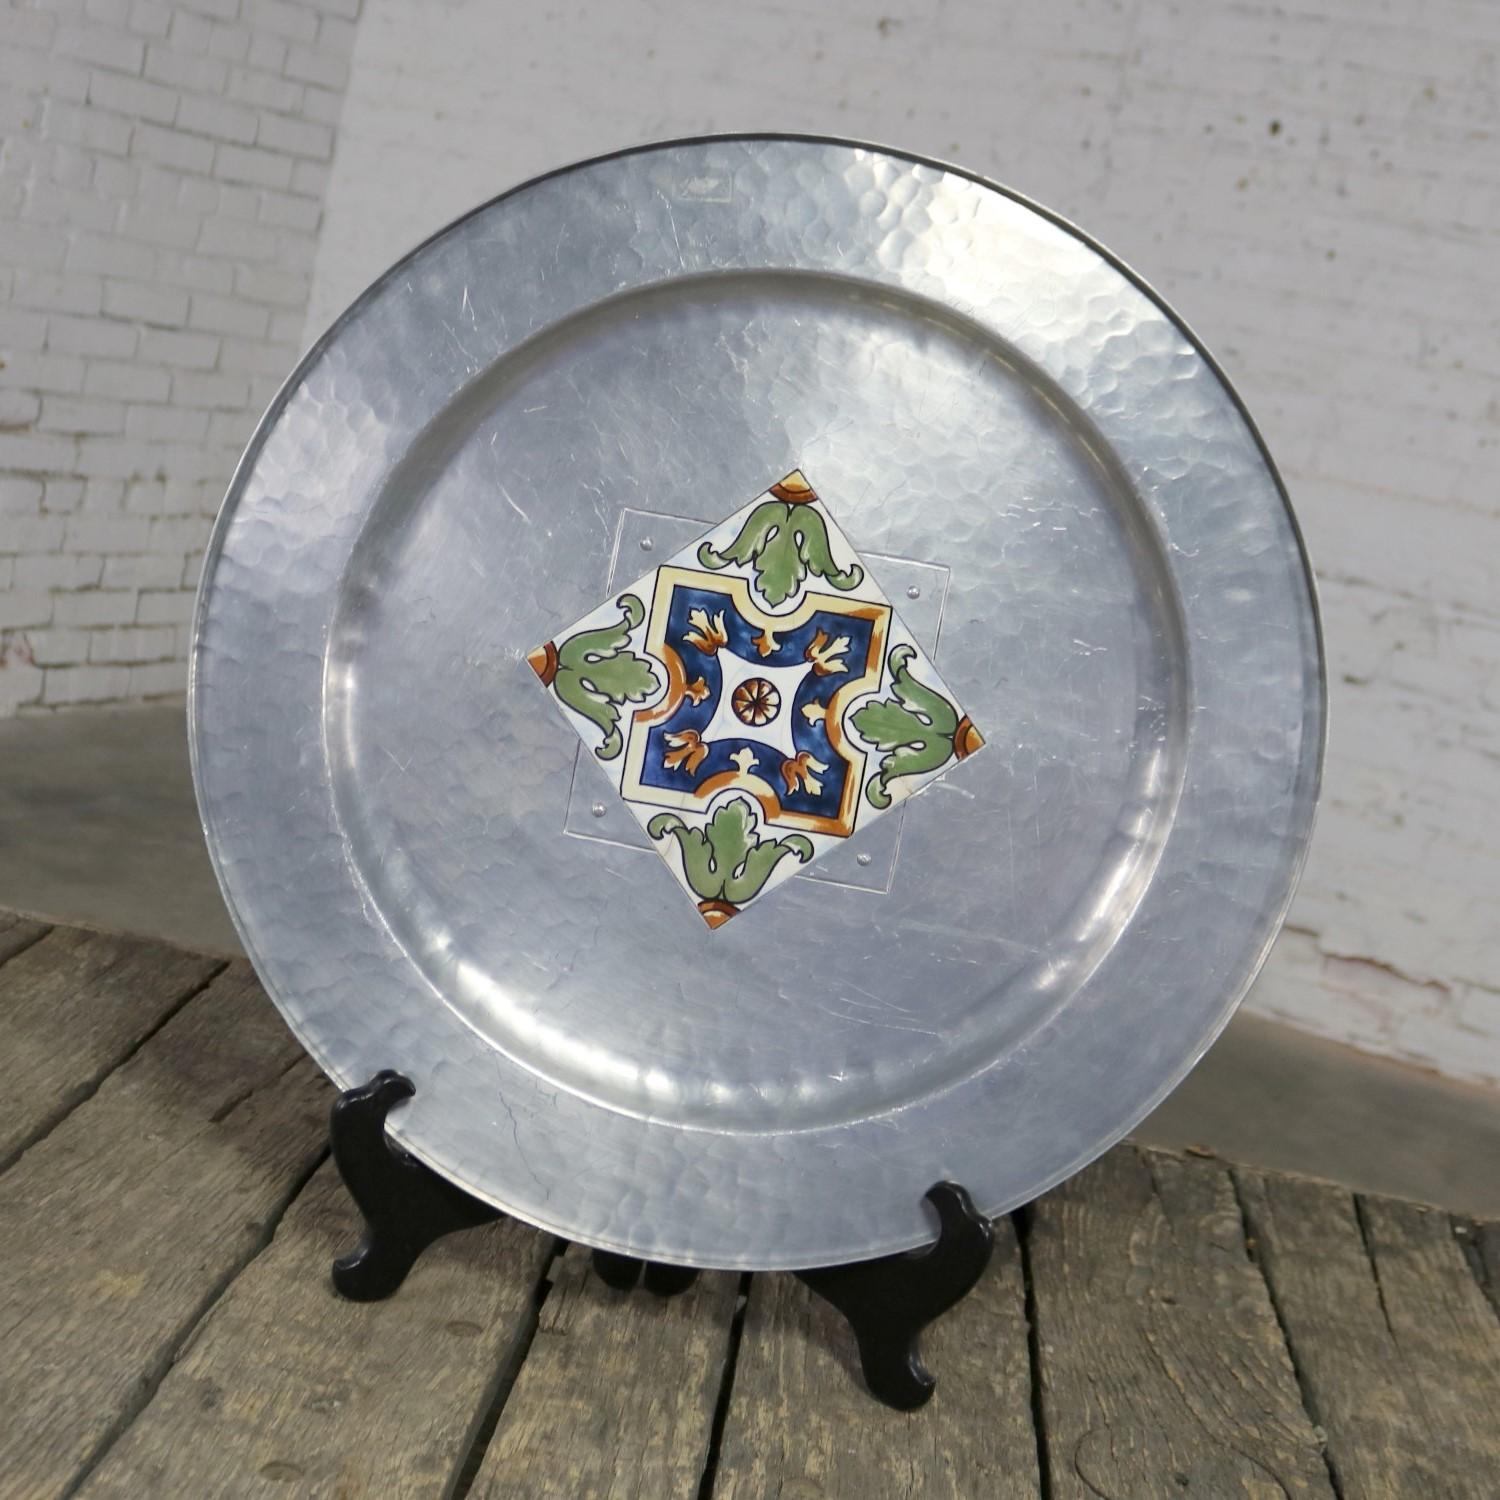 Handsome and large hand-wrought aluminum tray or charger with ceramic tile center signed on back hand-wrought M W Laird Argental. It is in wonderful vintage condition. There are some scratches to the back. But, the front is blemish free as far as we